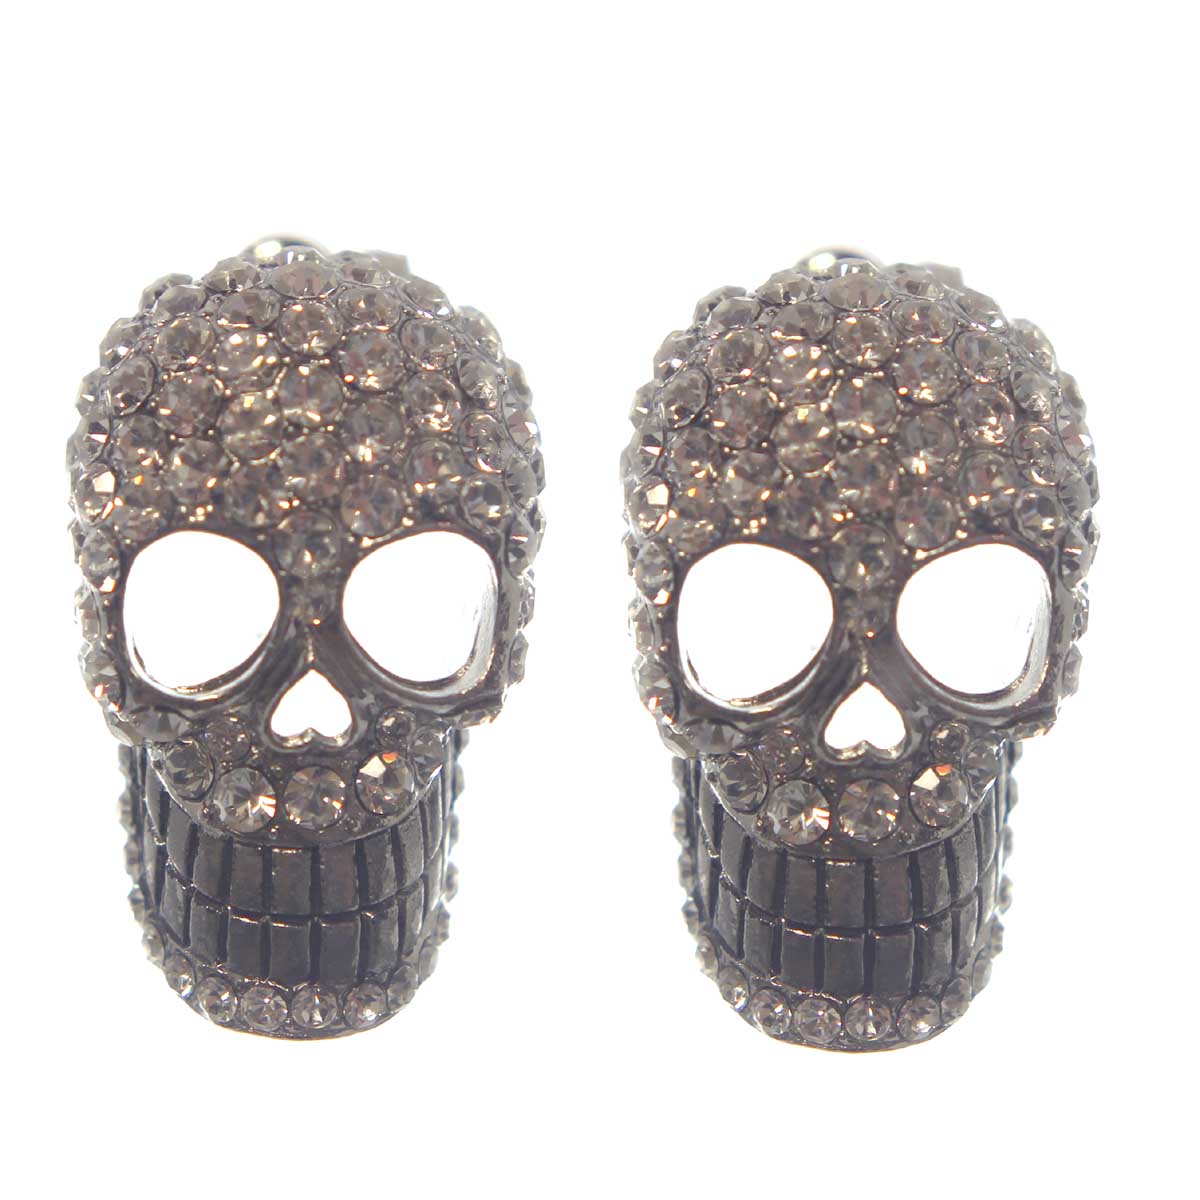 Pave Skull Necklace & Earring Set